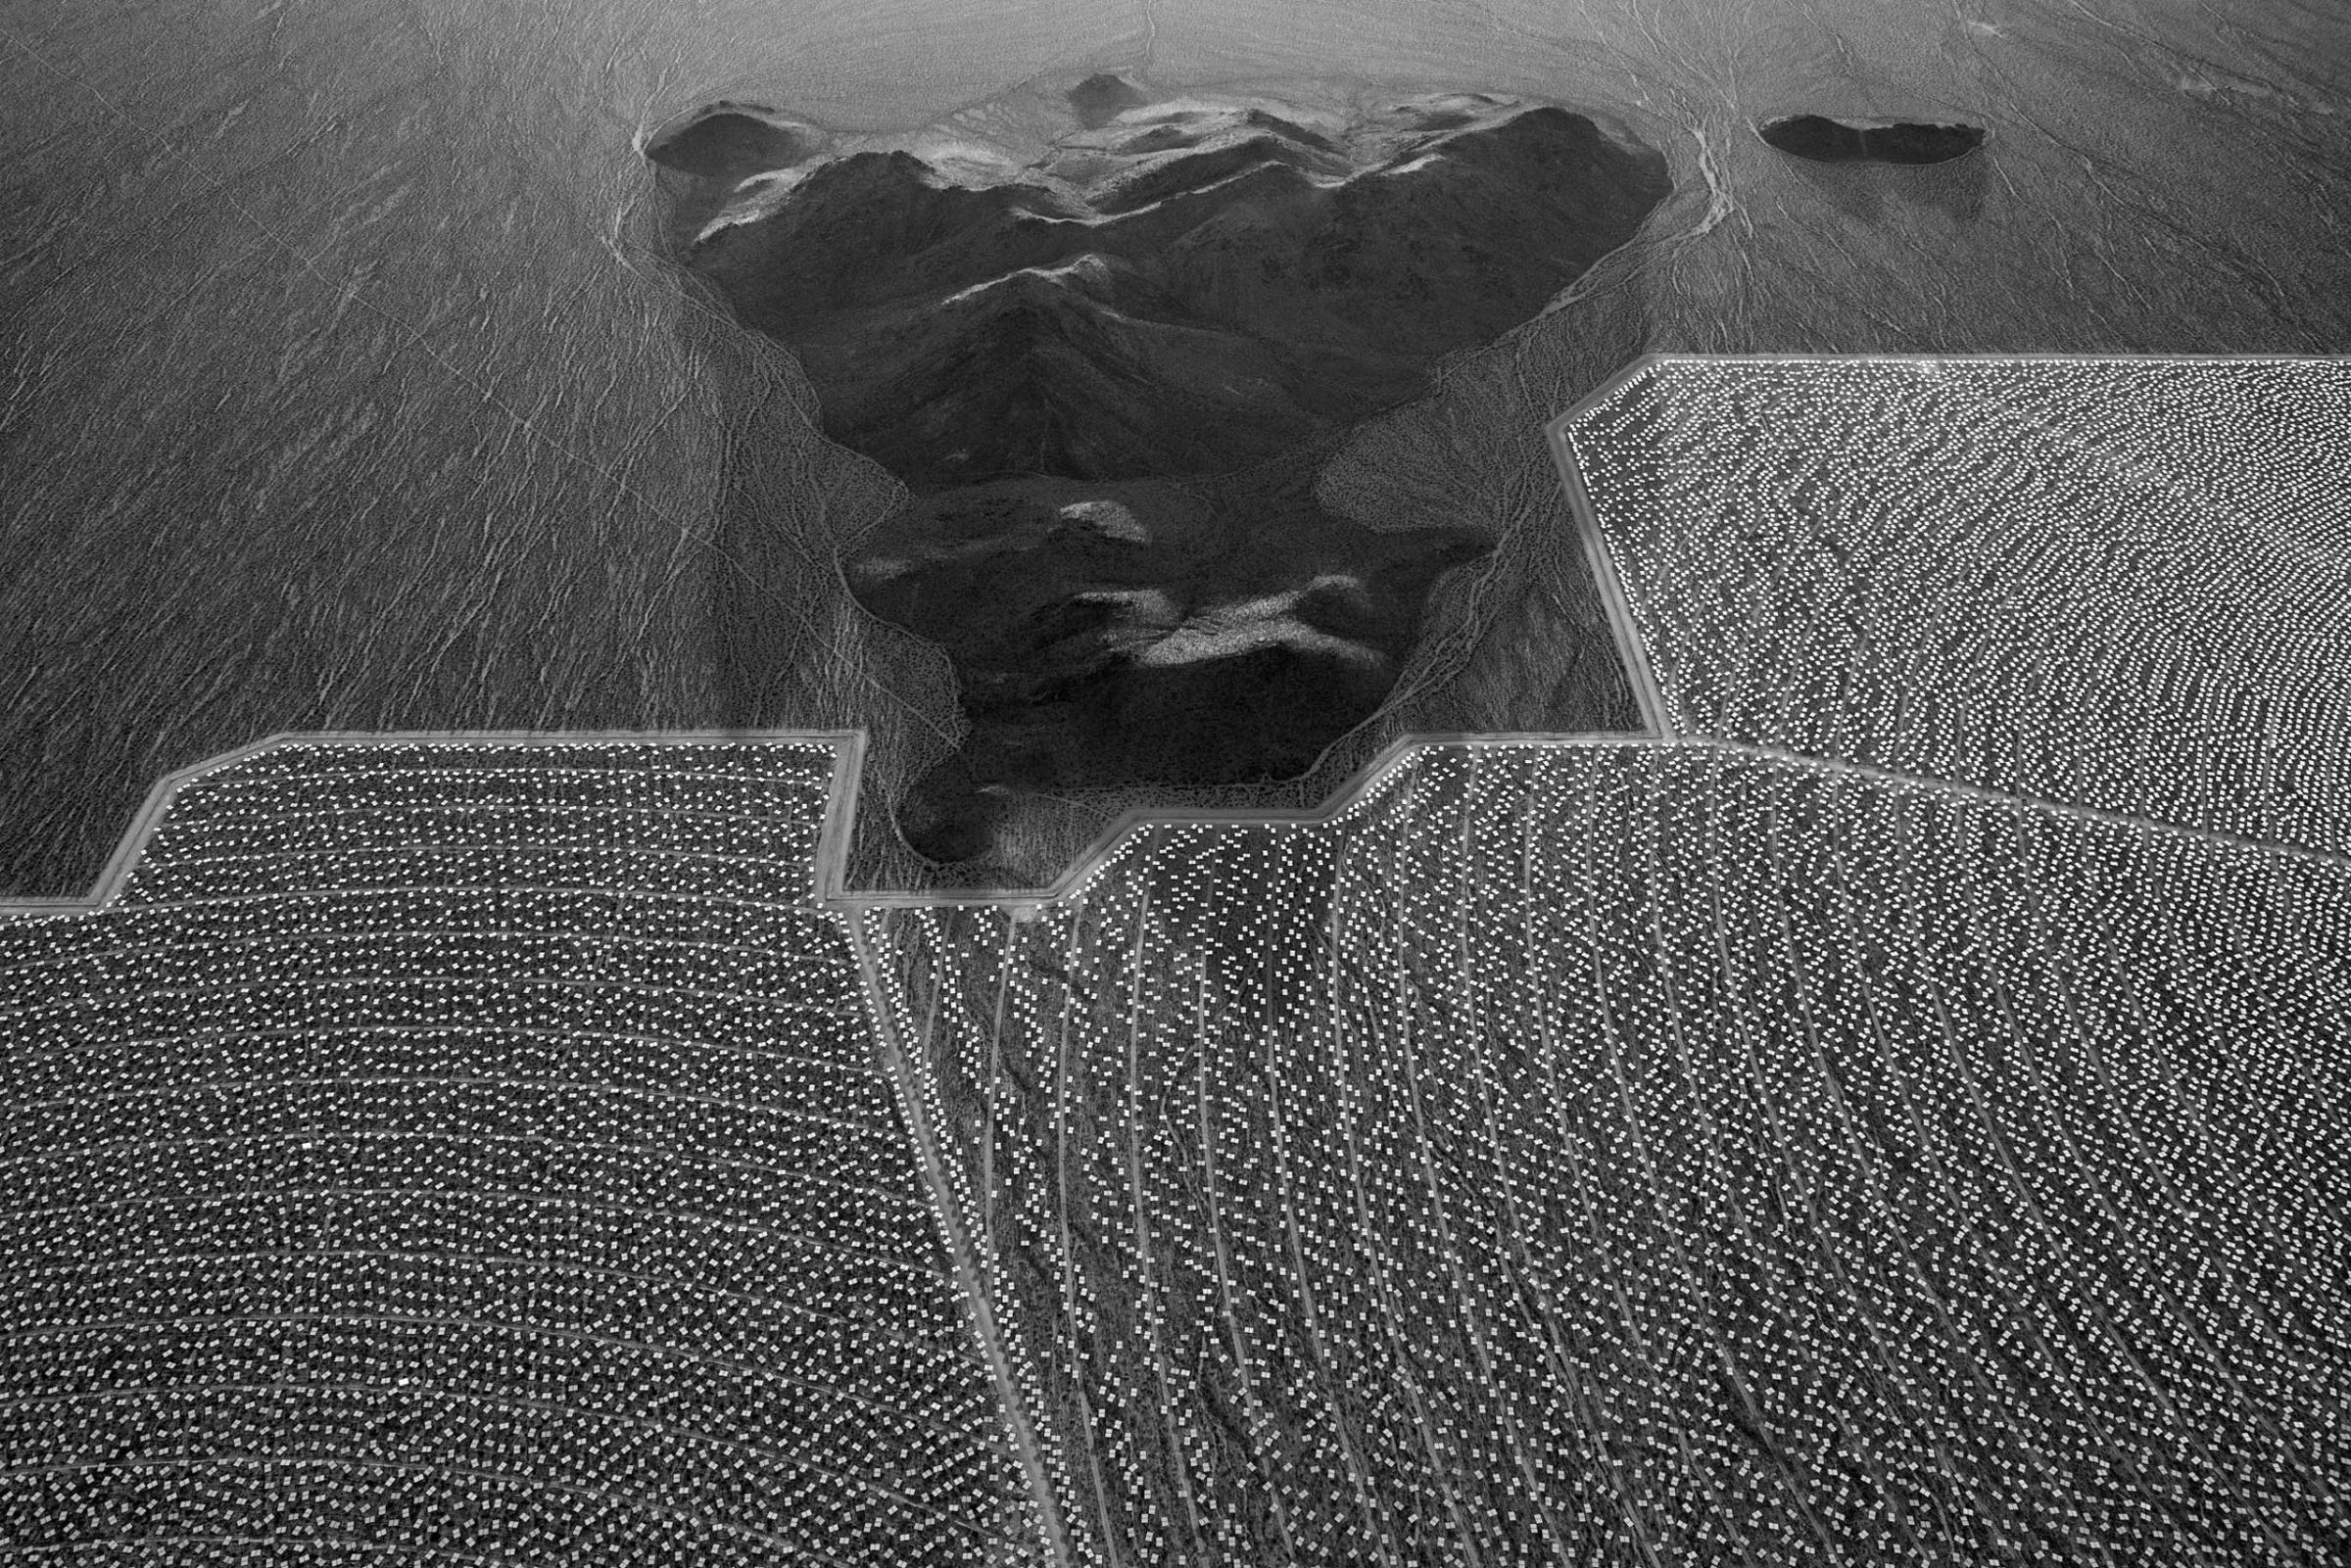 Mirrored heliostats dot the landscape at the Ivanpah Solar Plant in the Mojave Desert, California. Jamey Stillings